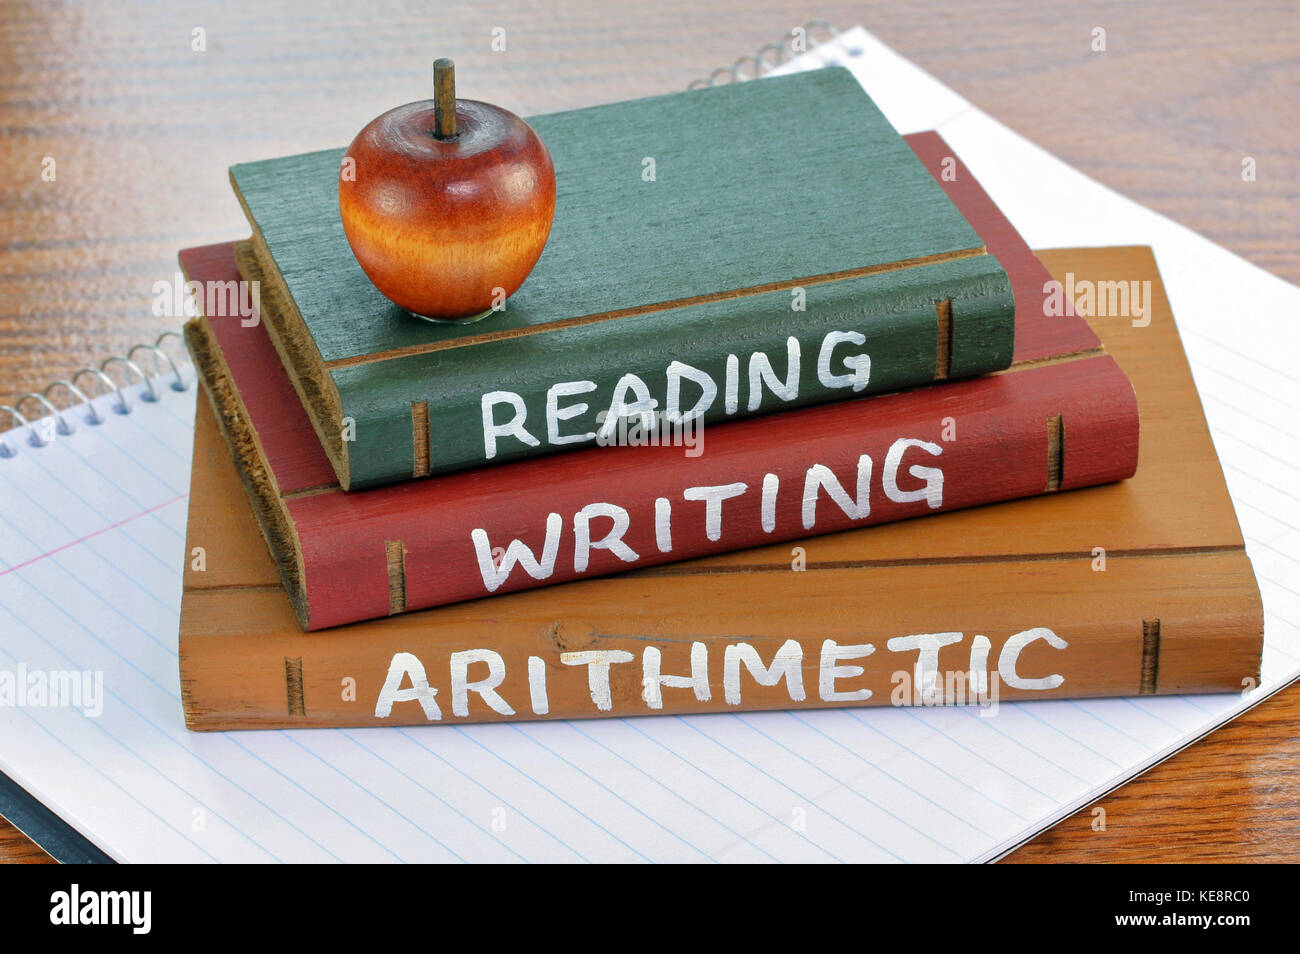 Reading Writing Arithmetic High Resolution Stock Photography and Images - Alamy